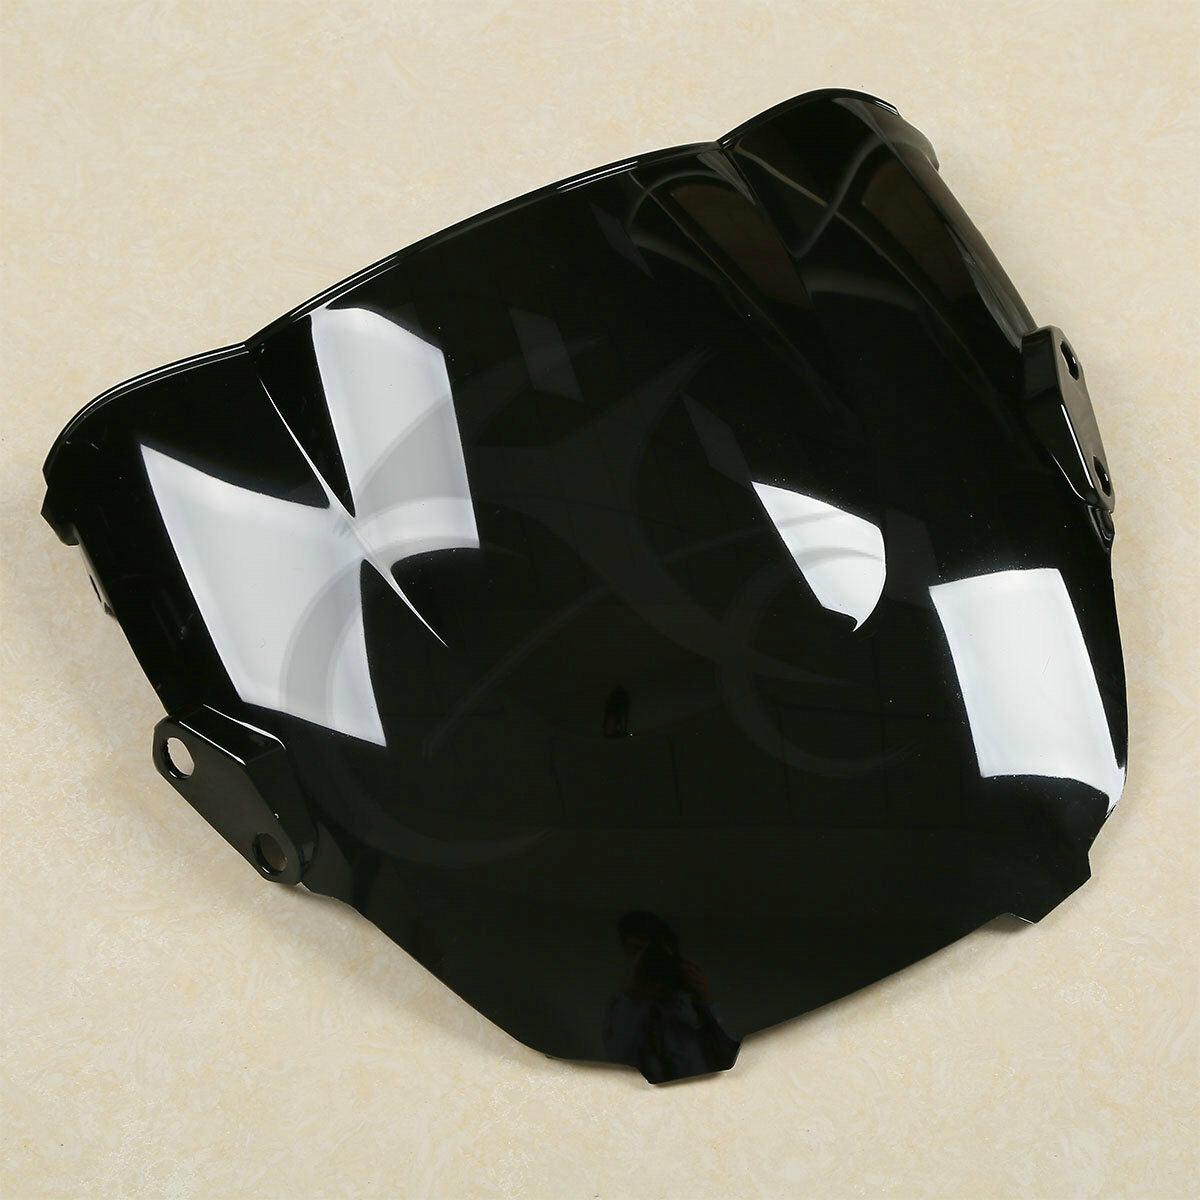 Black Windscreen Windshield Fit For Motorcycle Honda CBR600RR F3 95-98 1996 1997 - Moto Life Products